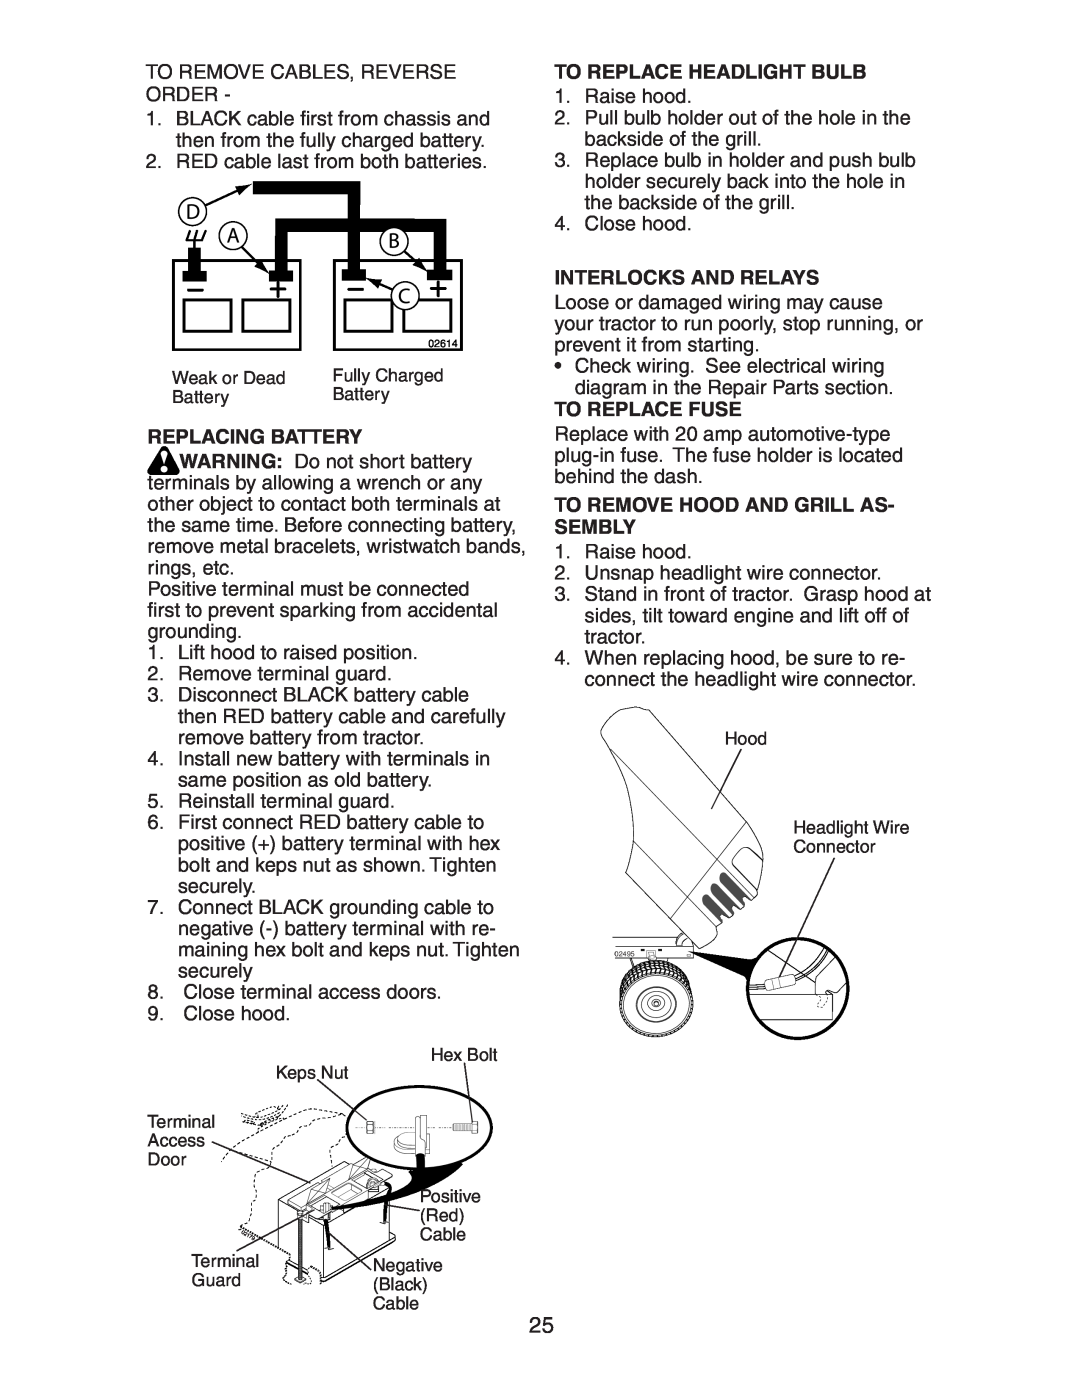 Craftsman 917.27581 owner manual To Replace Headlight Bulb, Interlocks And Relays, To Replace Fuse, Replacing Battery 